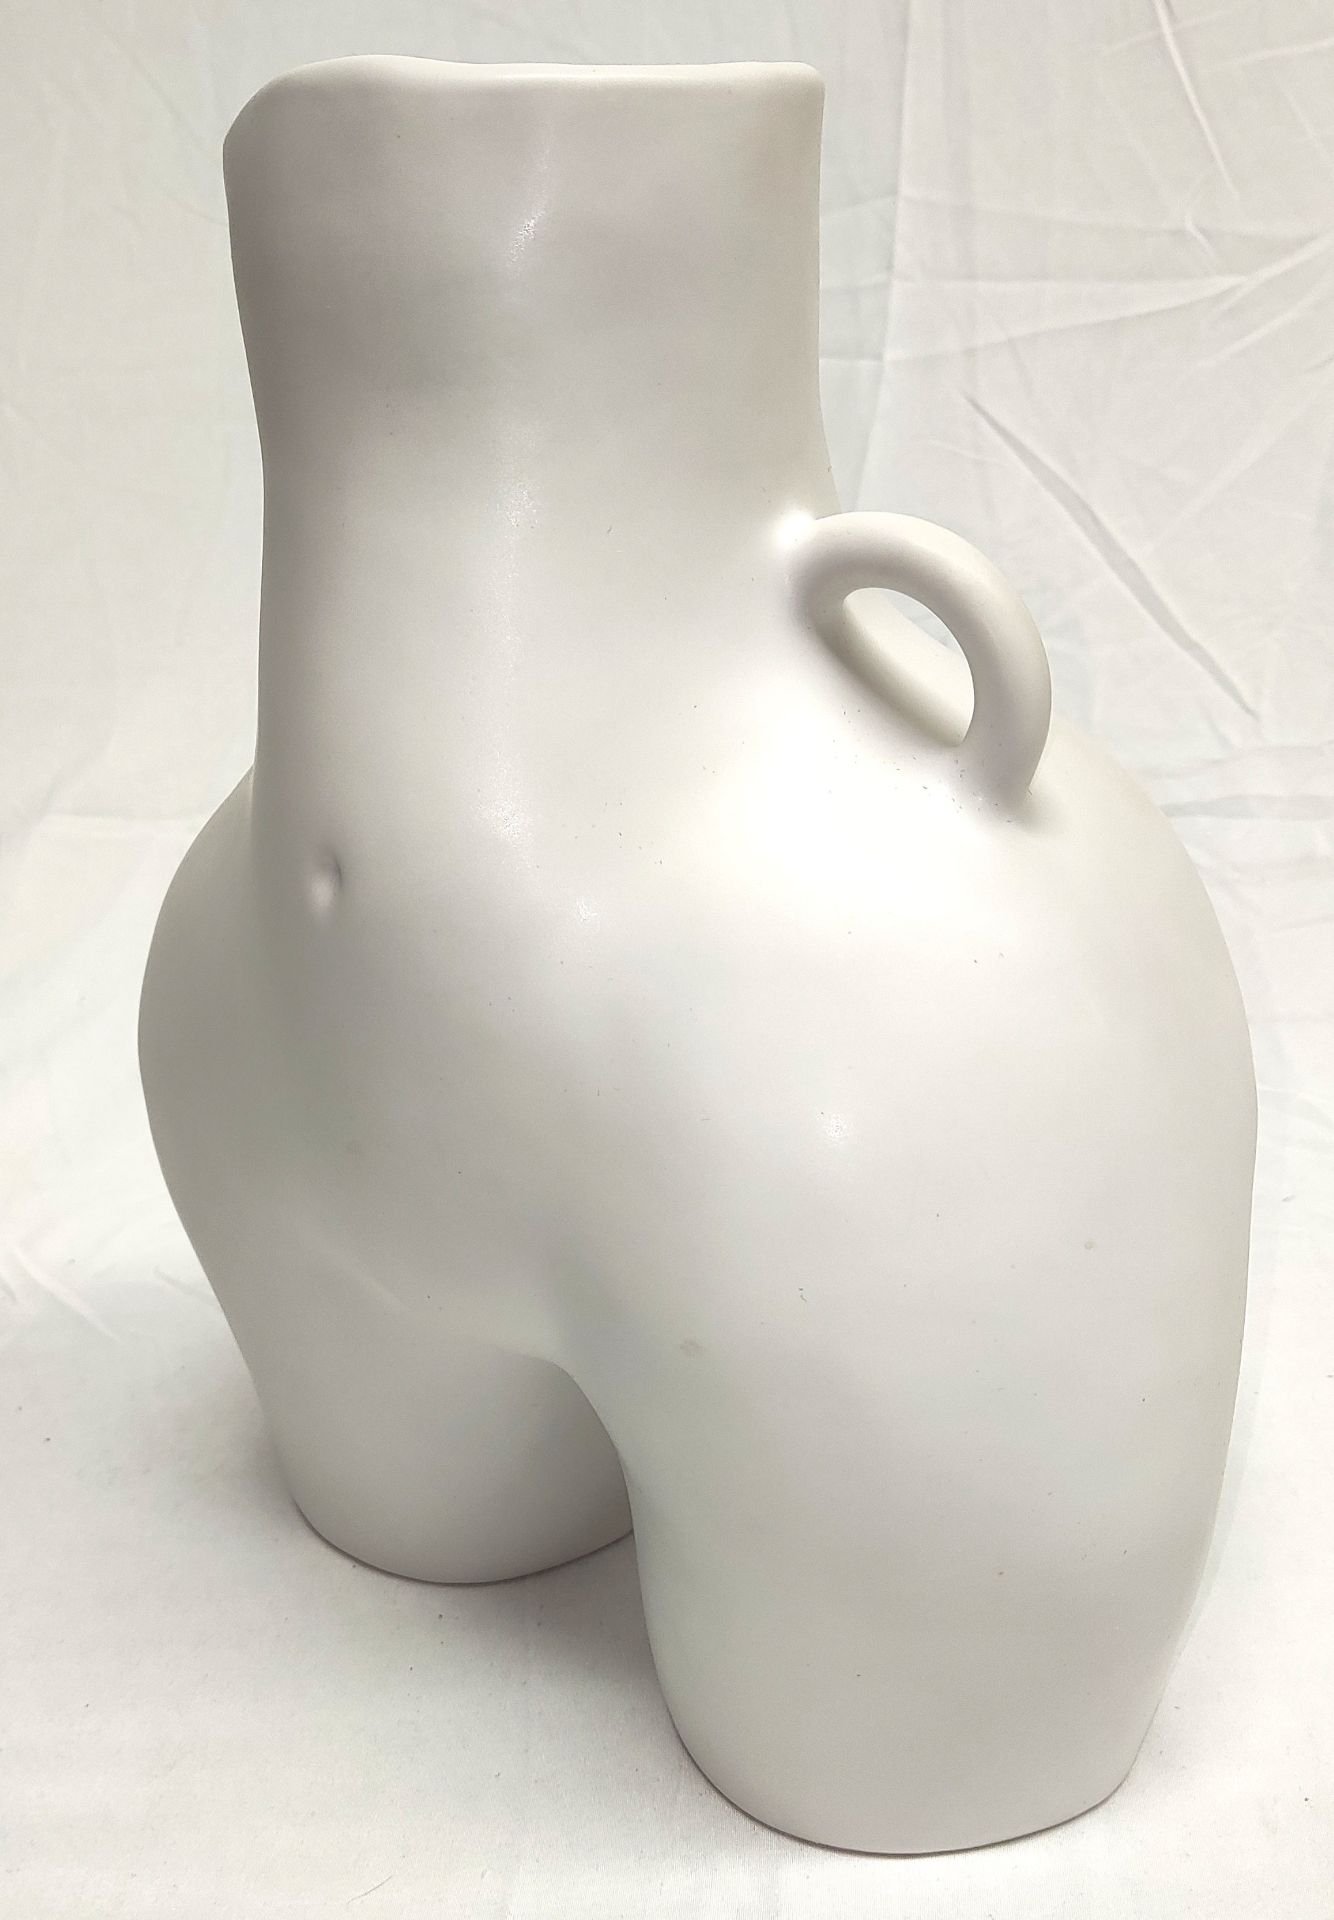 1 x ANISSA KERMICHE Love Handles Vase In White - Boxed - Original RRP £340 - Ref: 6787060/HJL382/ - Image 7 of 16